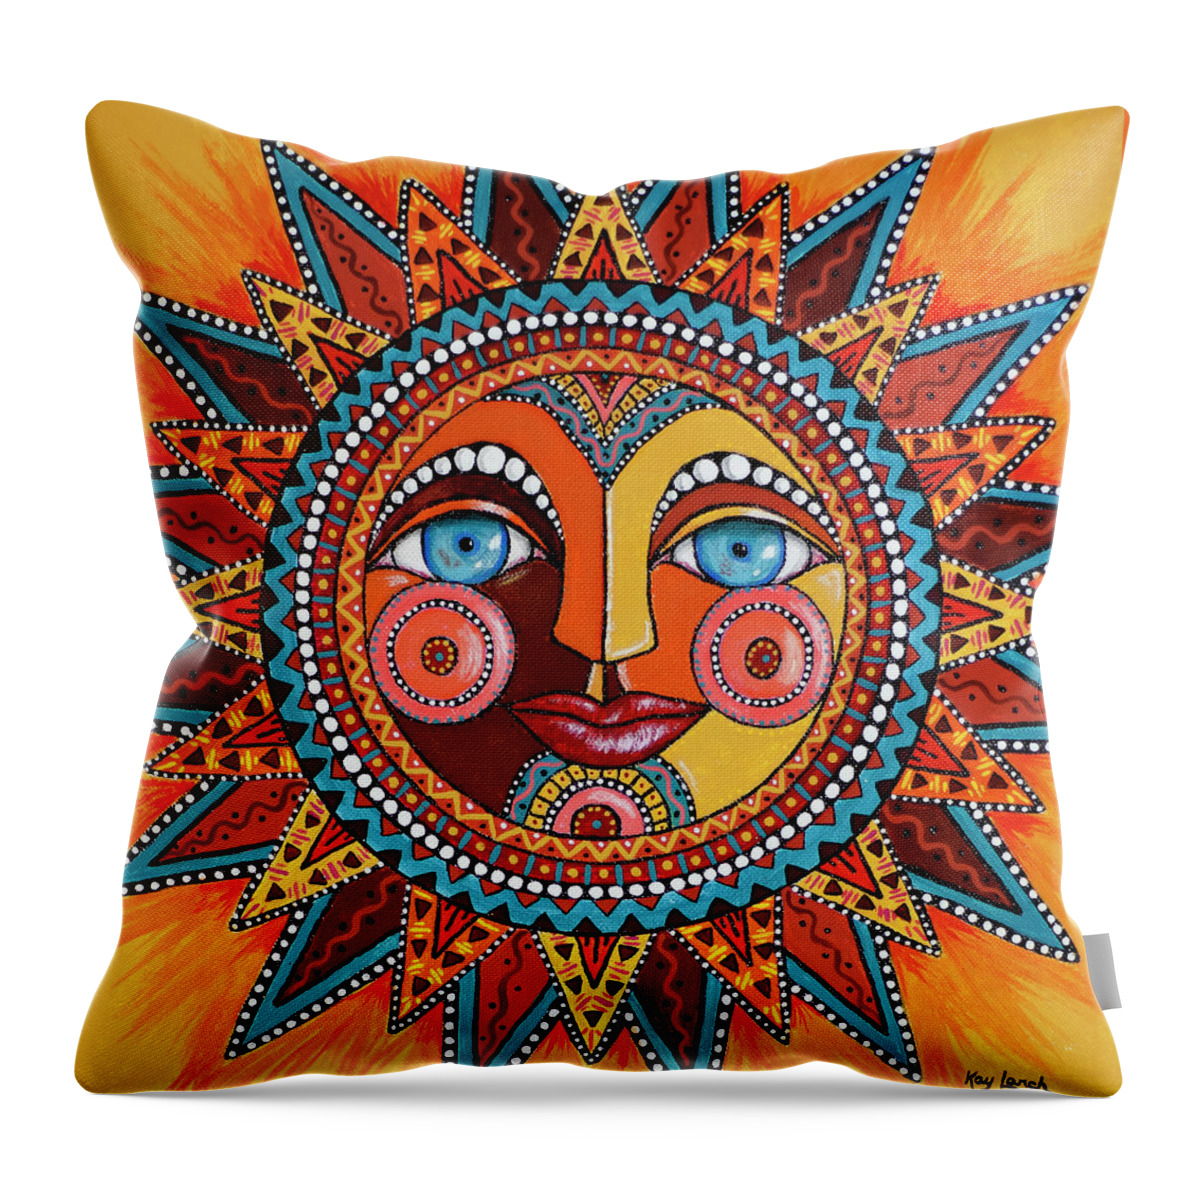 Sun Throw Pillow featuring the painting Smiling Sun by Kay Larch